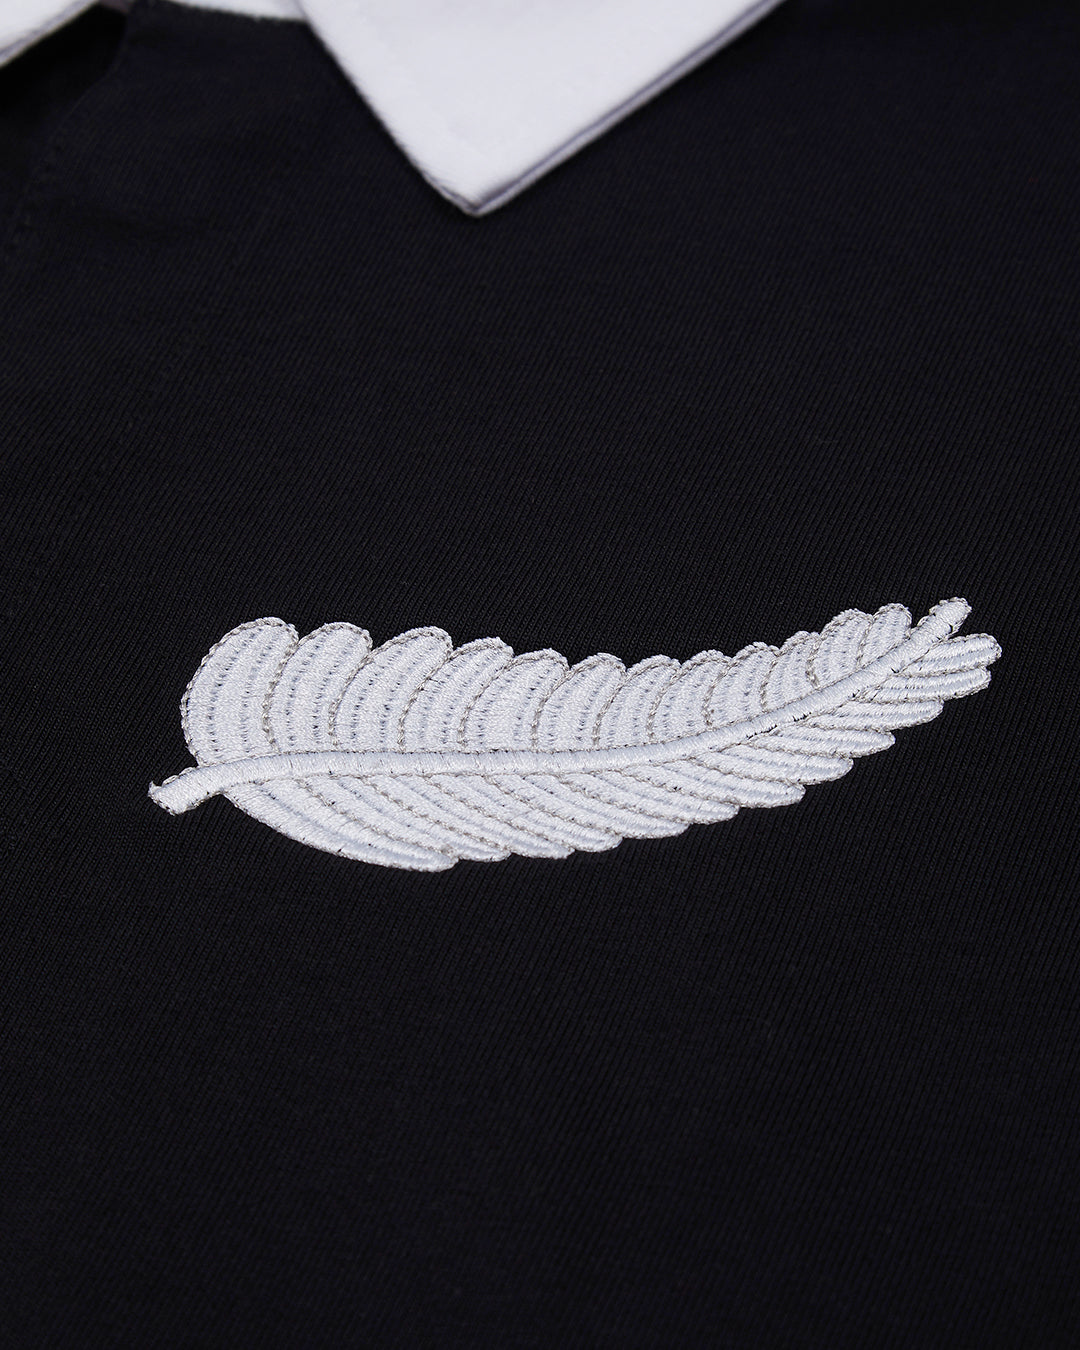 VC: NZL - Vintage Rugby Shirt - New Zealand